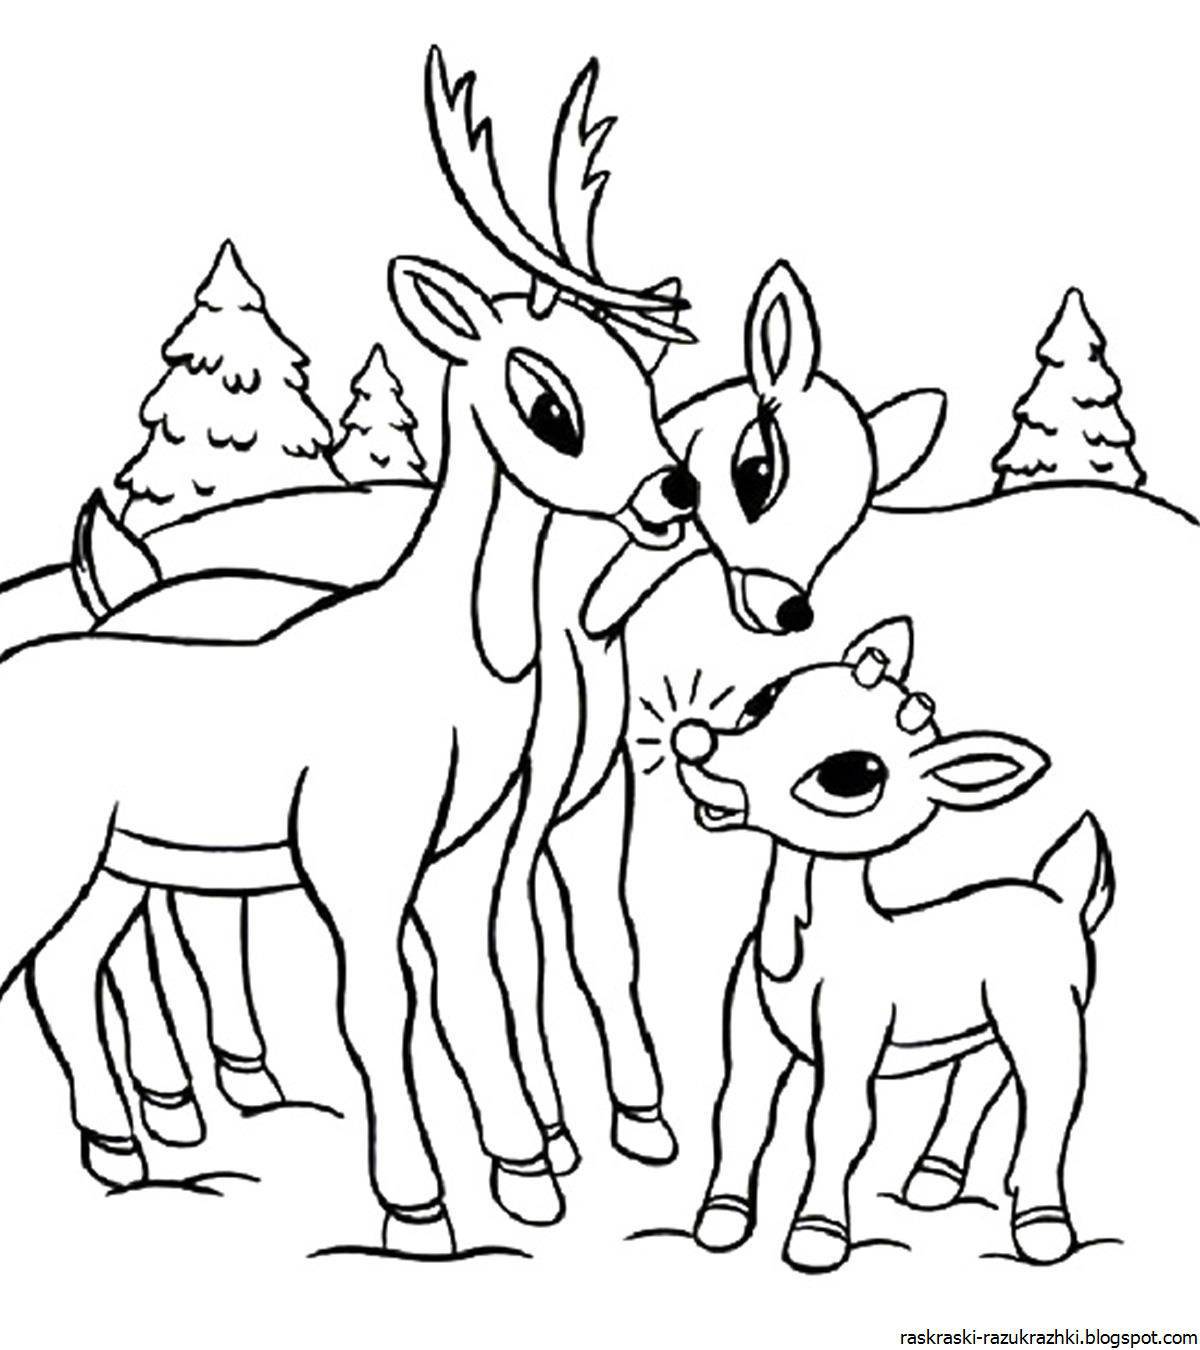 Whimsical deer coloring pages for kids